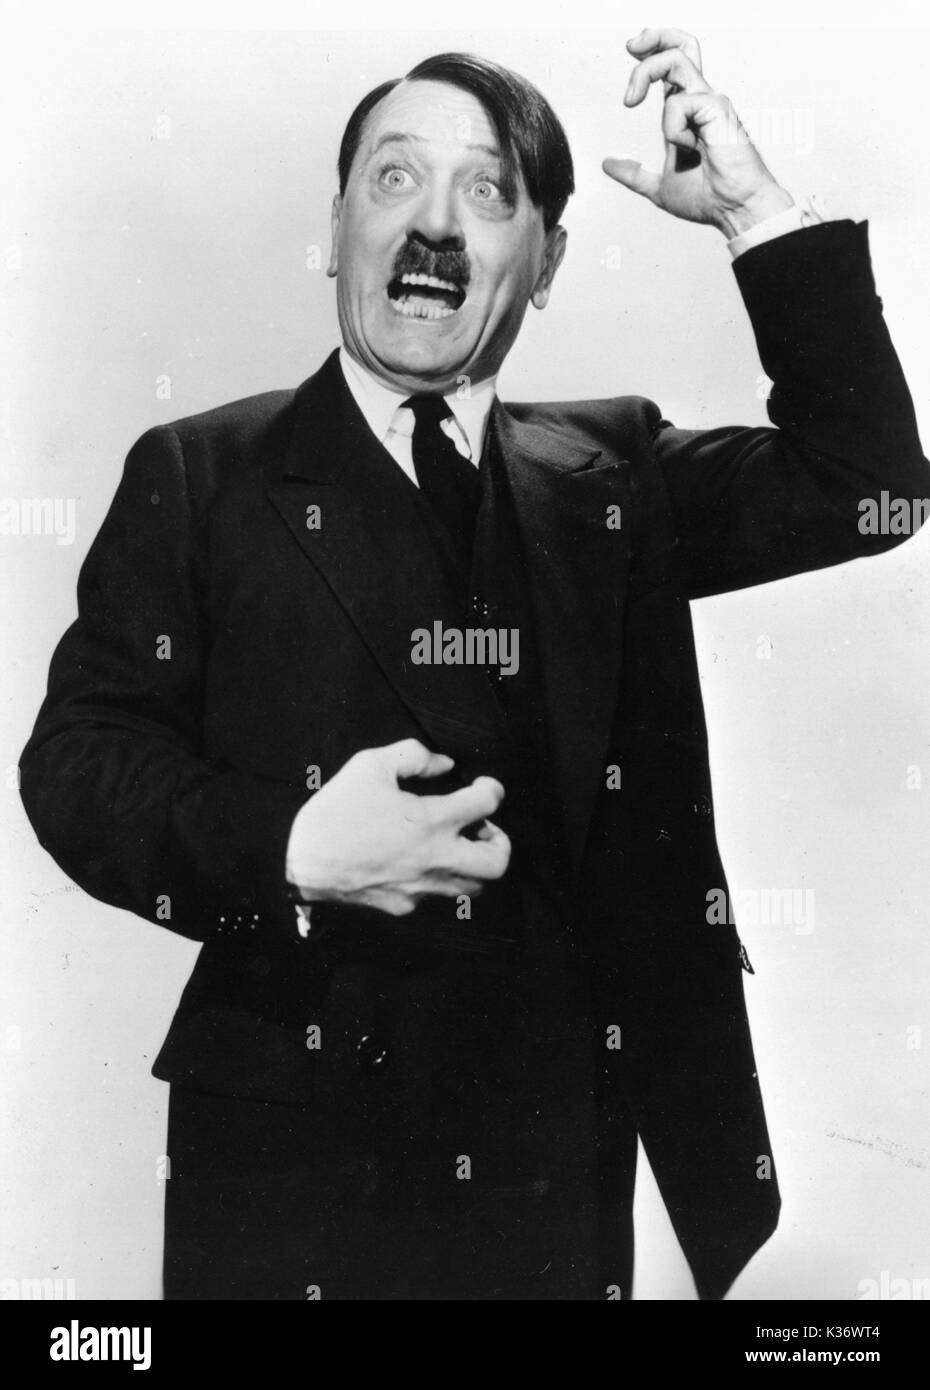 UNIDENTIFIED ACTOR IN UNIDENTIFIED FILM IMPERSONATING HITLER Stock Photo